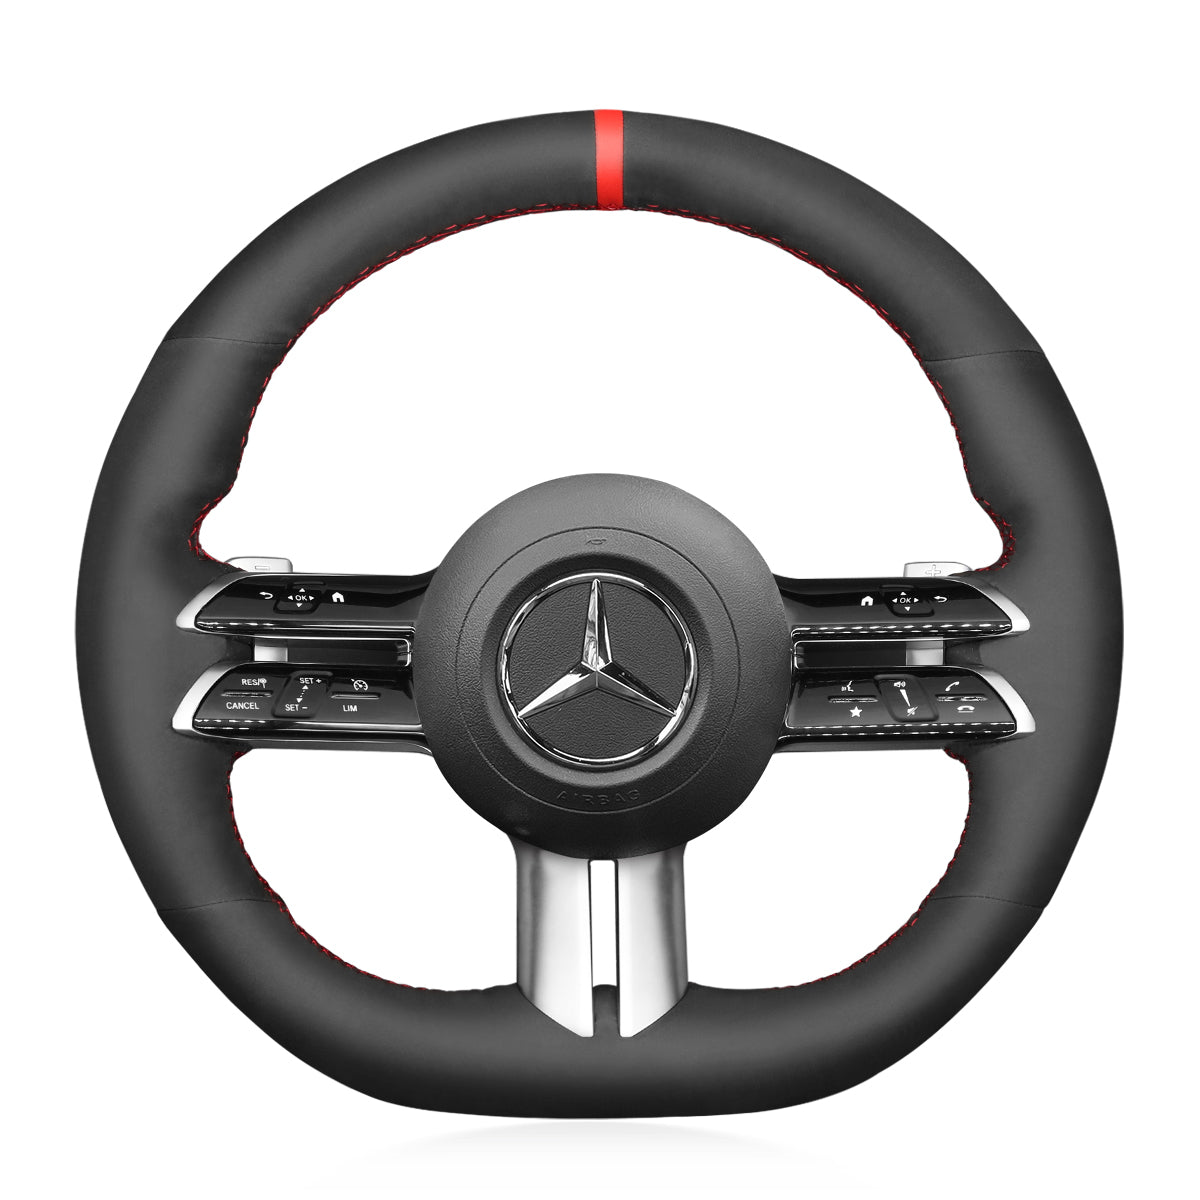 MEWANT Black Leather Suede Car Steering Wheel Cover for Mercedes Benz C-Class W206 / E-Class W213 / S-Class W223 2021